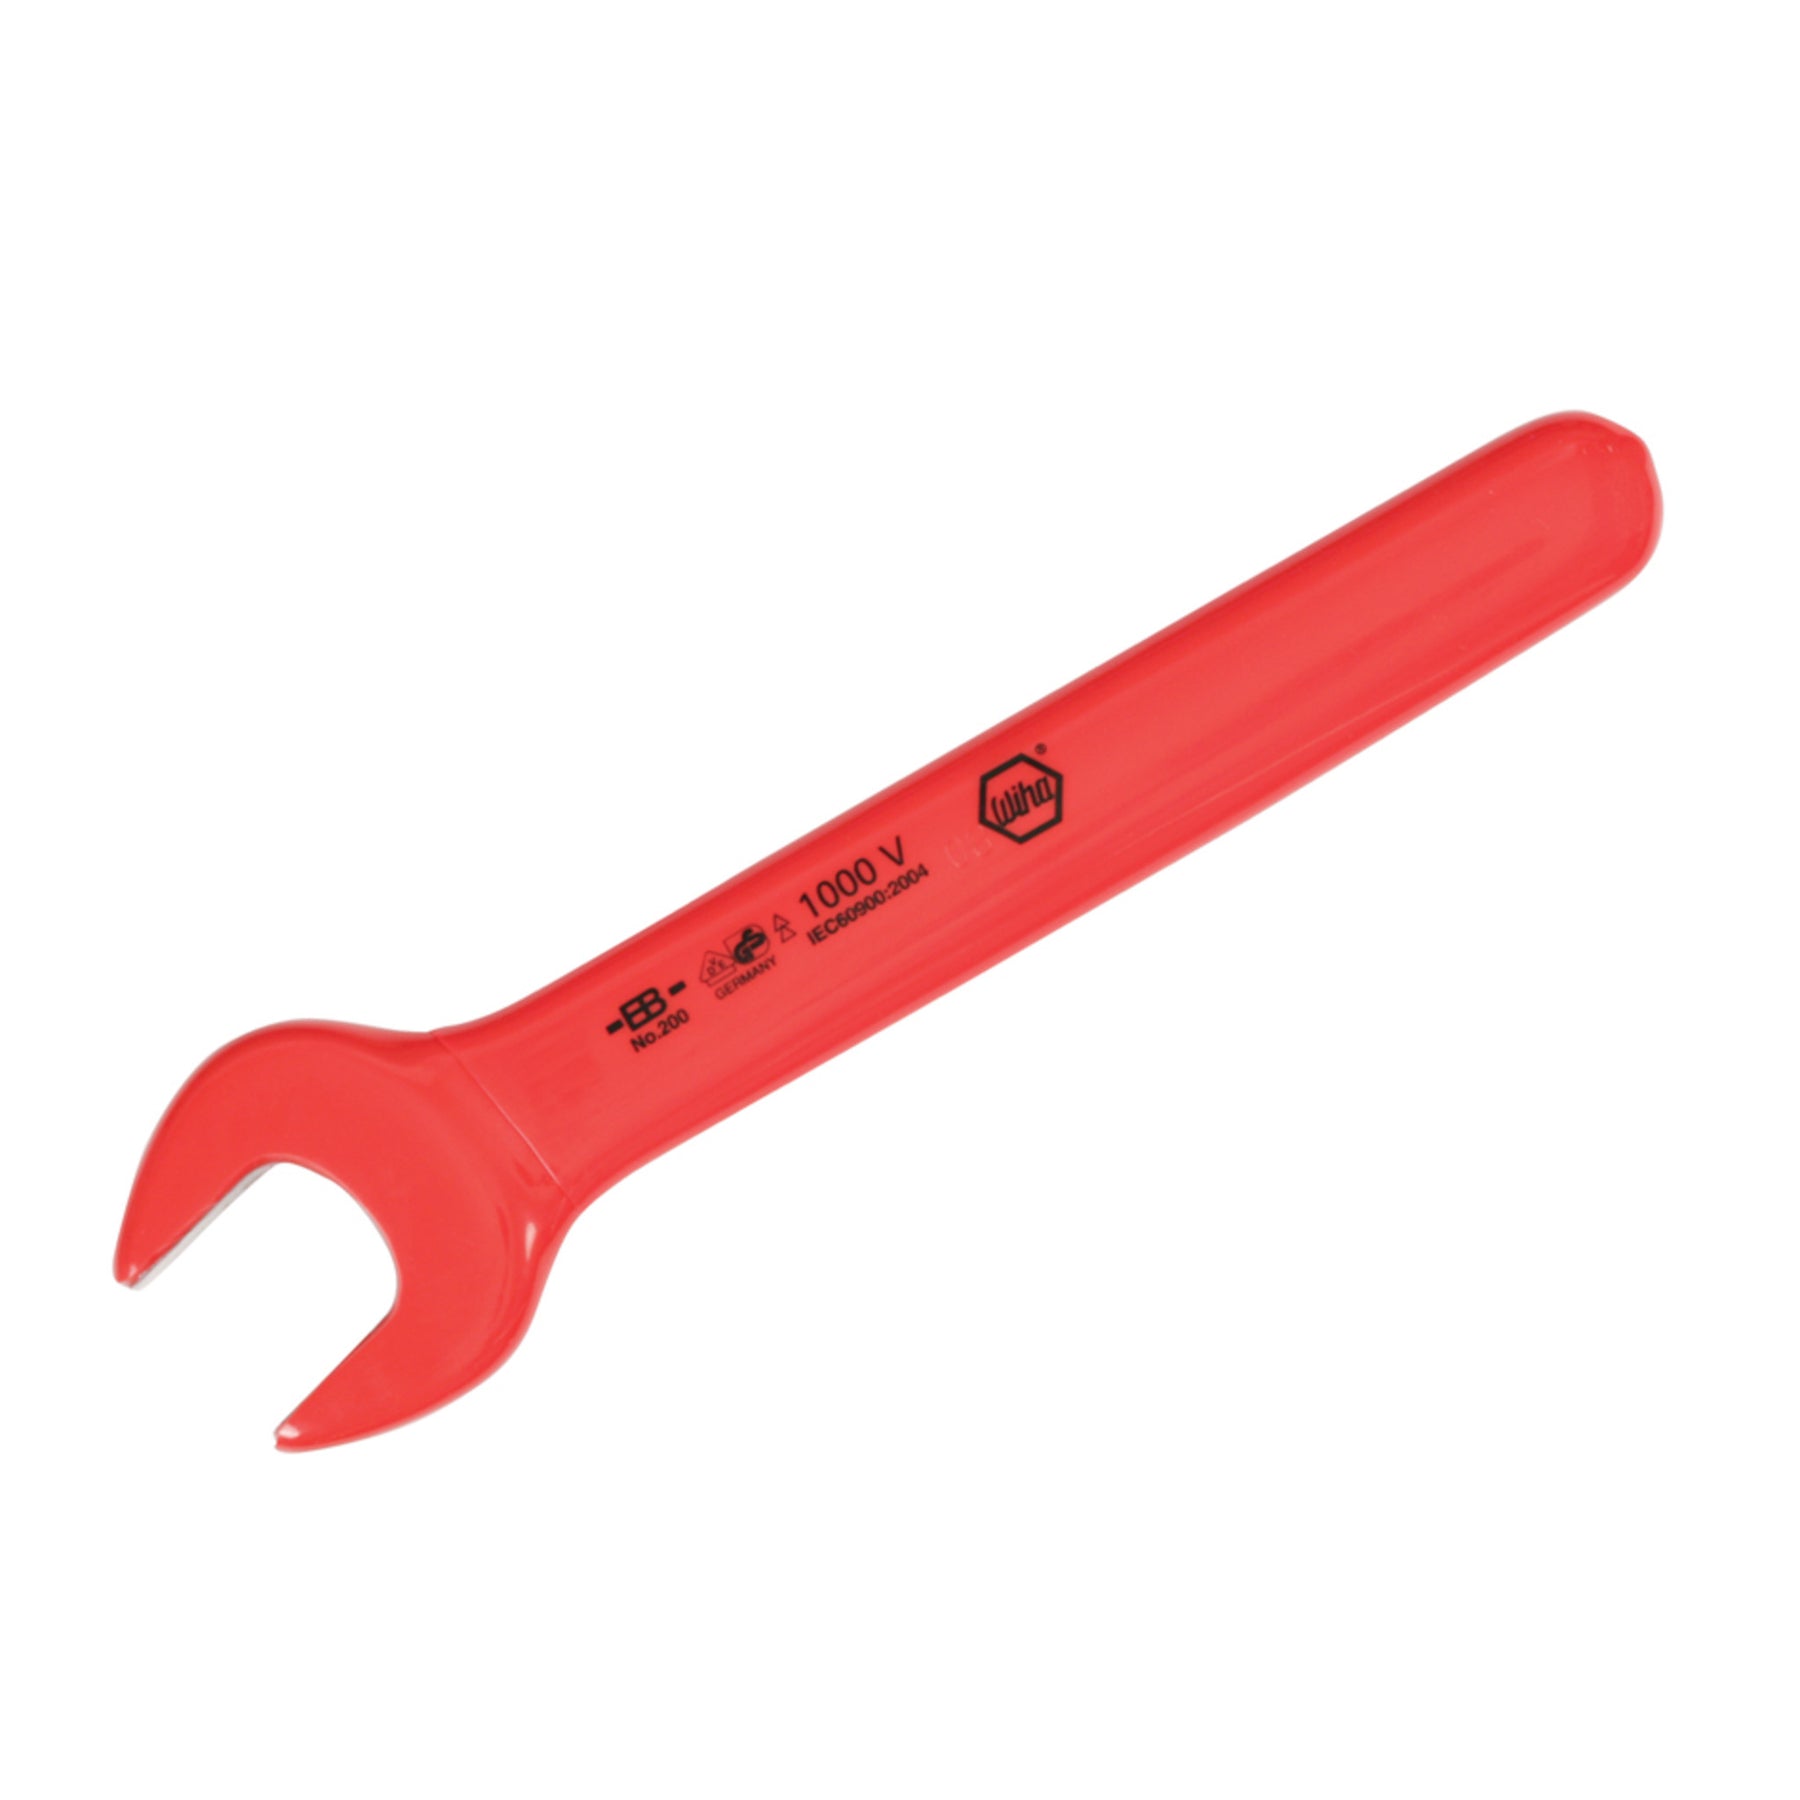 Wiha 20016 Insulated Open End Wrench 16.0mm